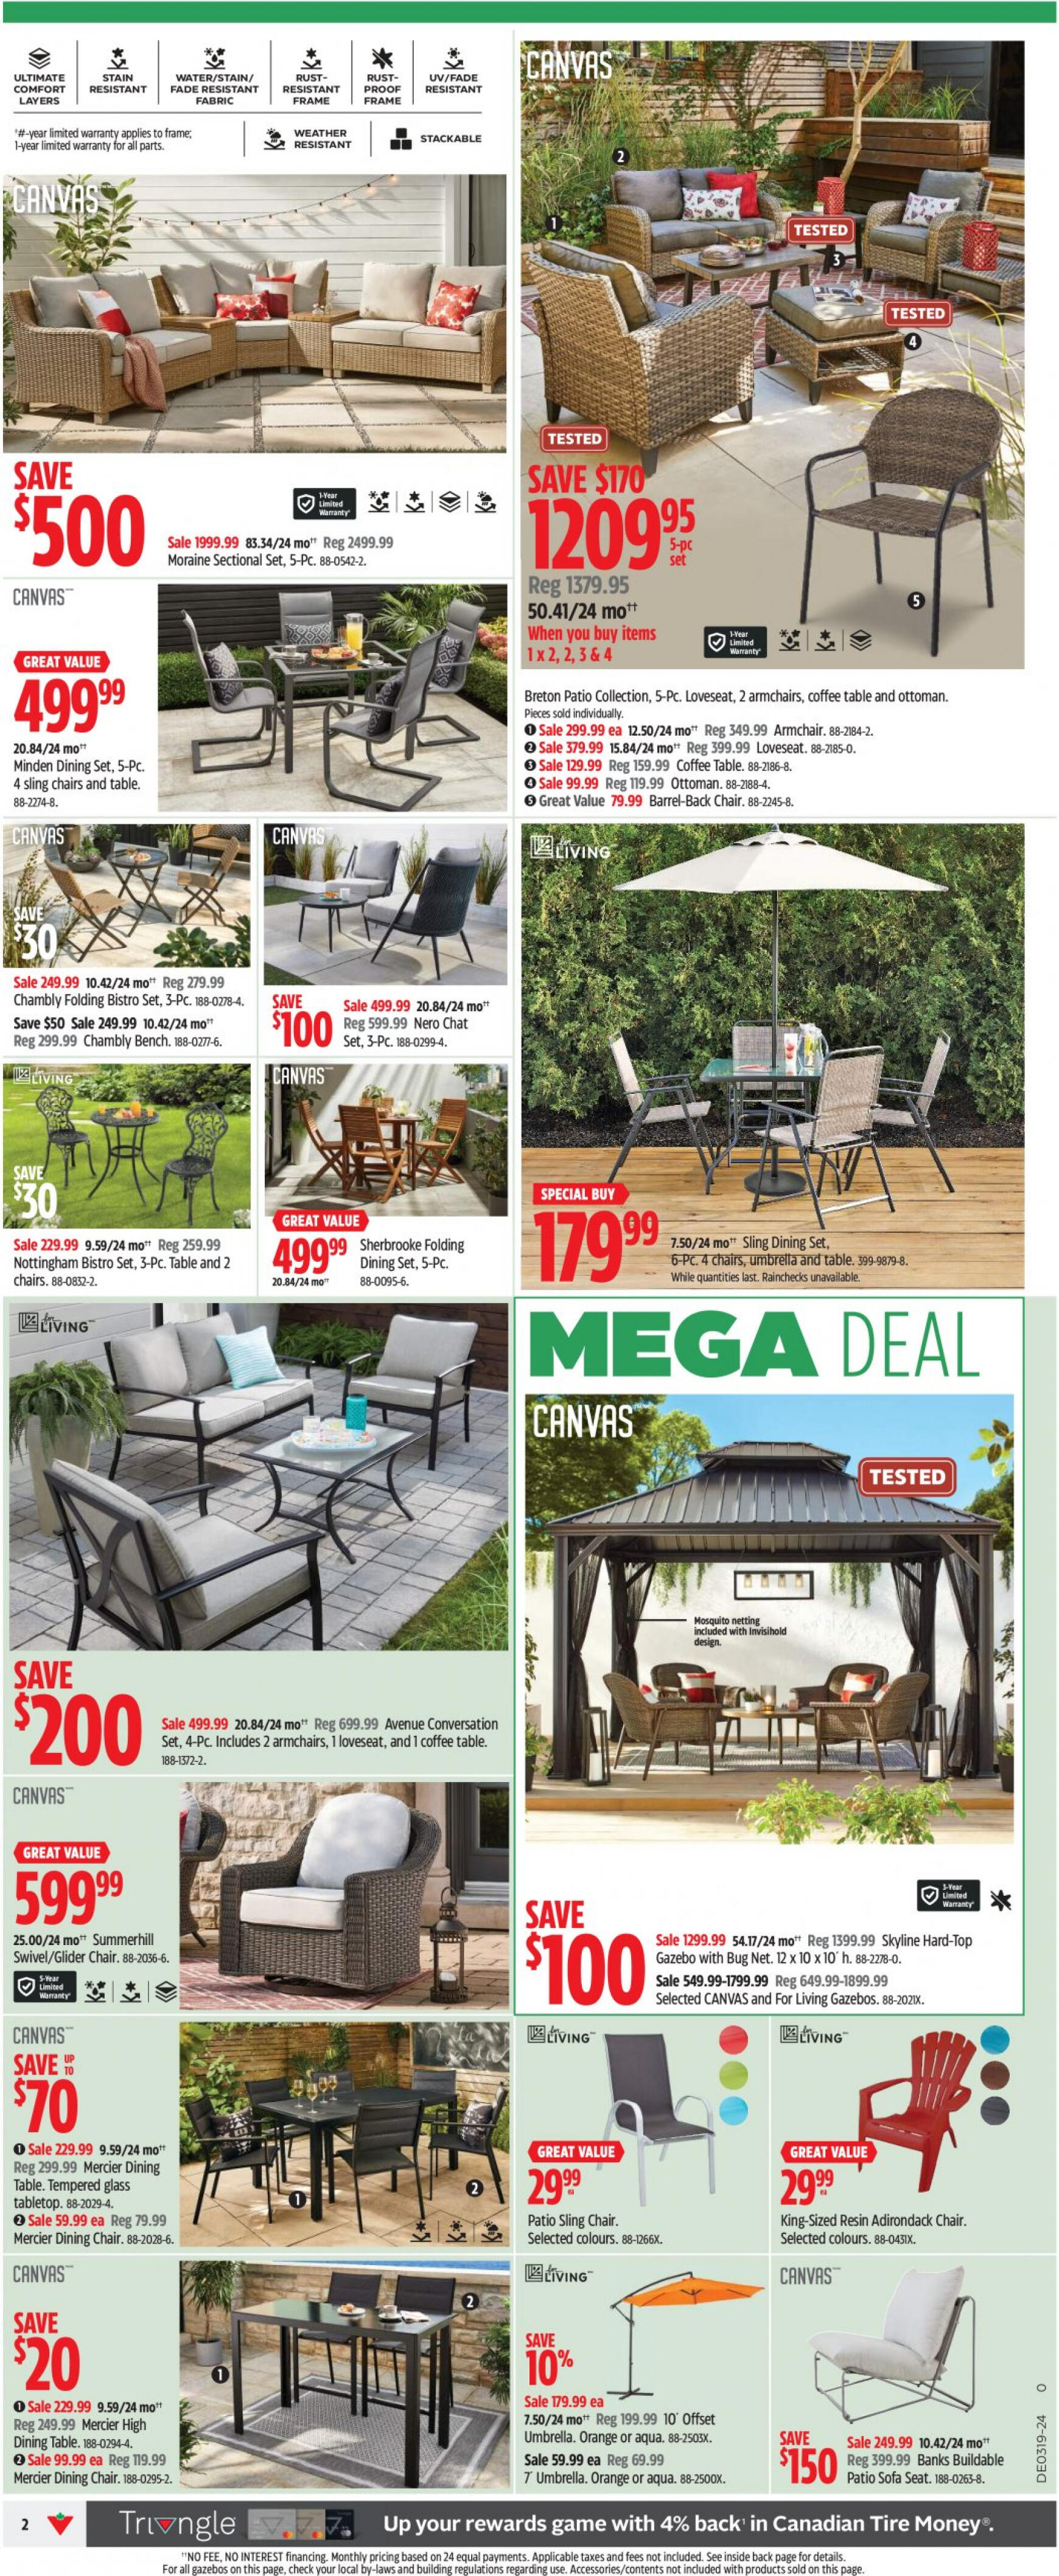 canadian-tire - Canadian Tire flyer current 02.05. - 08.05. - page: 2